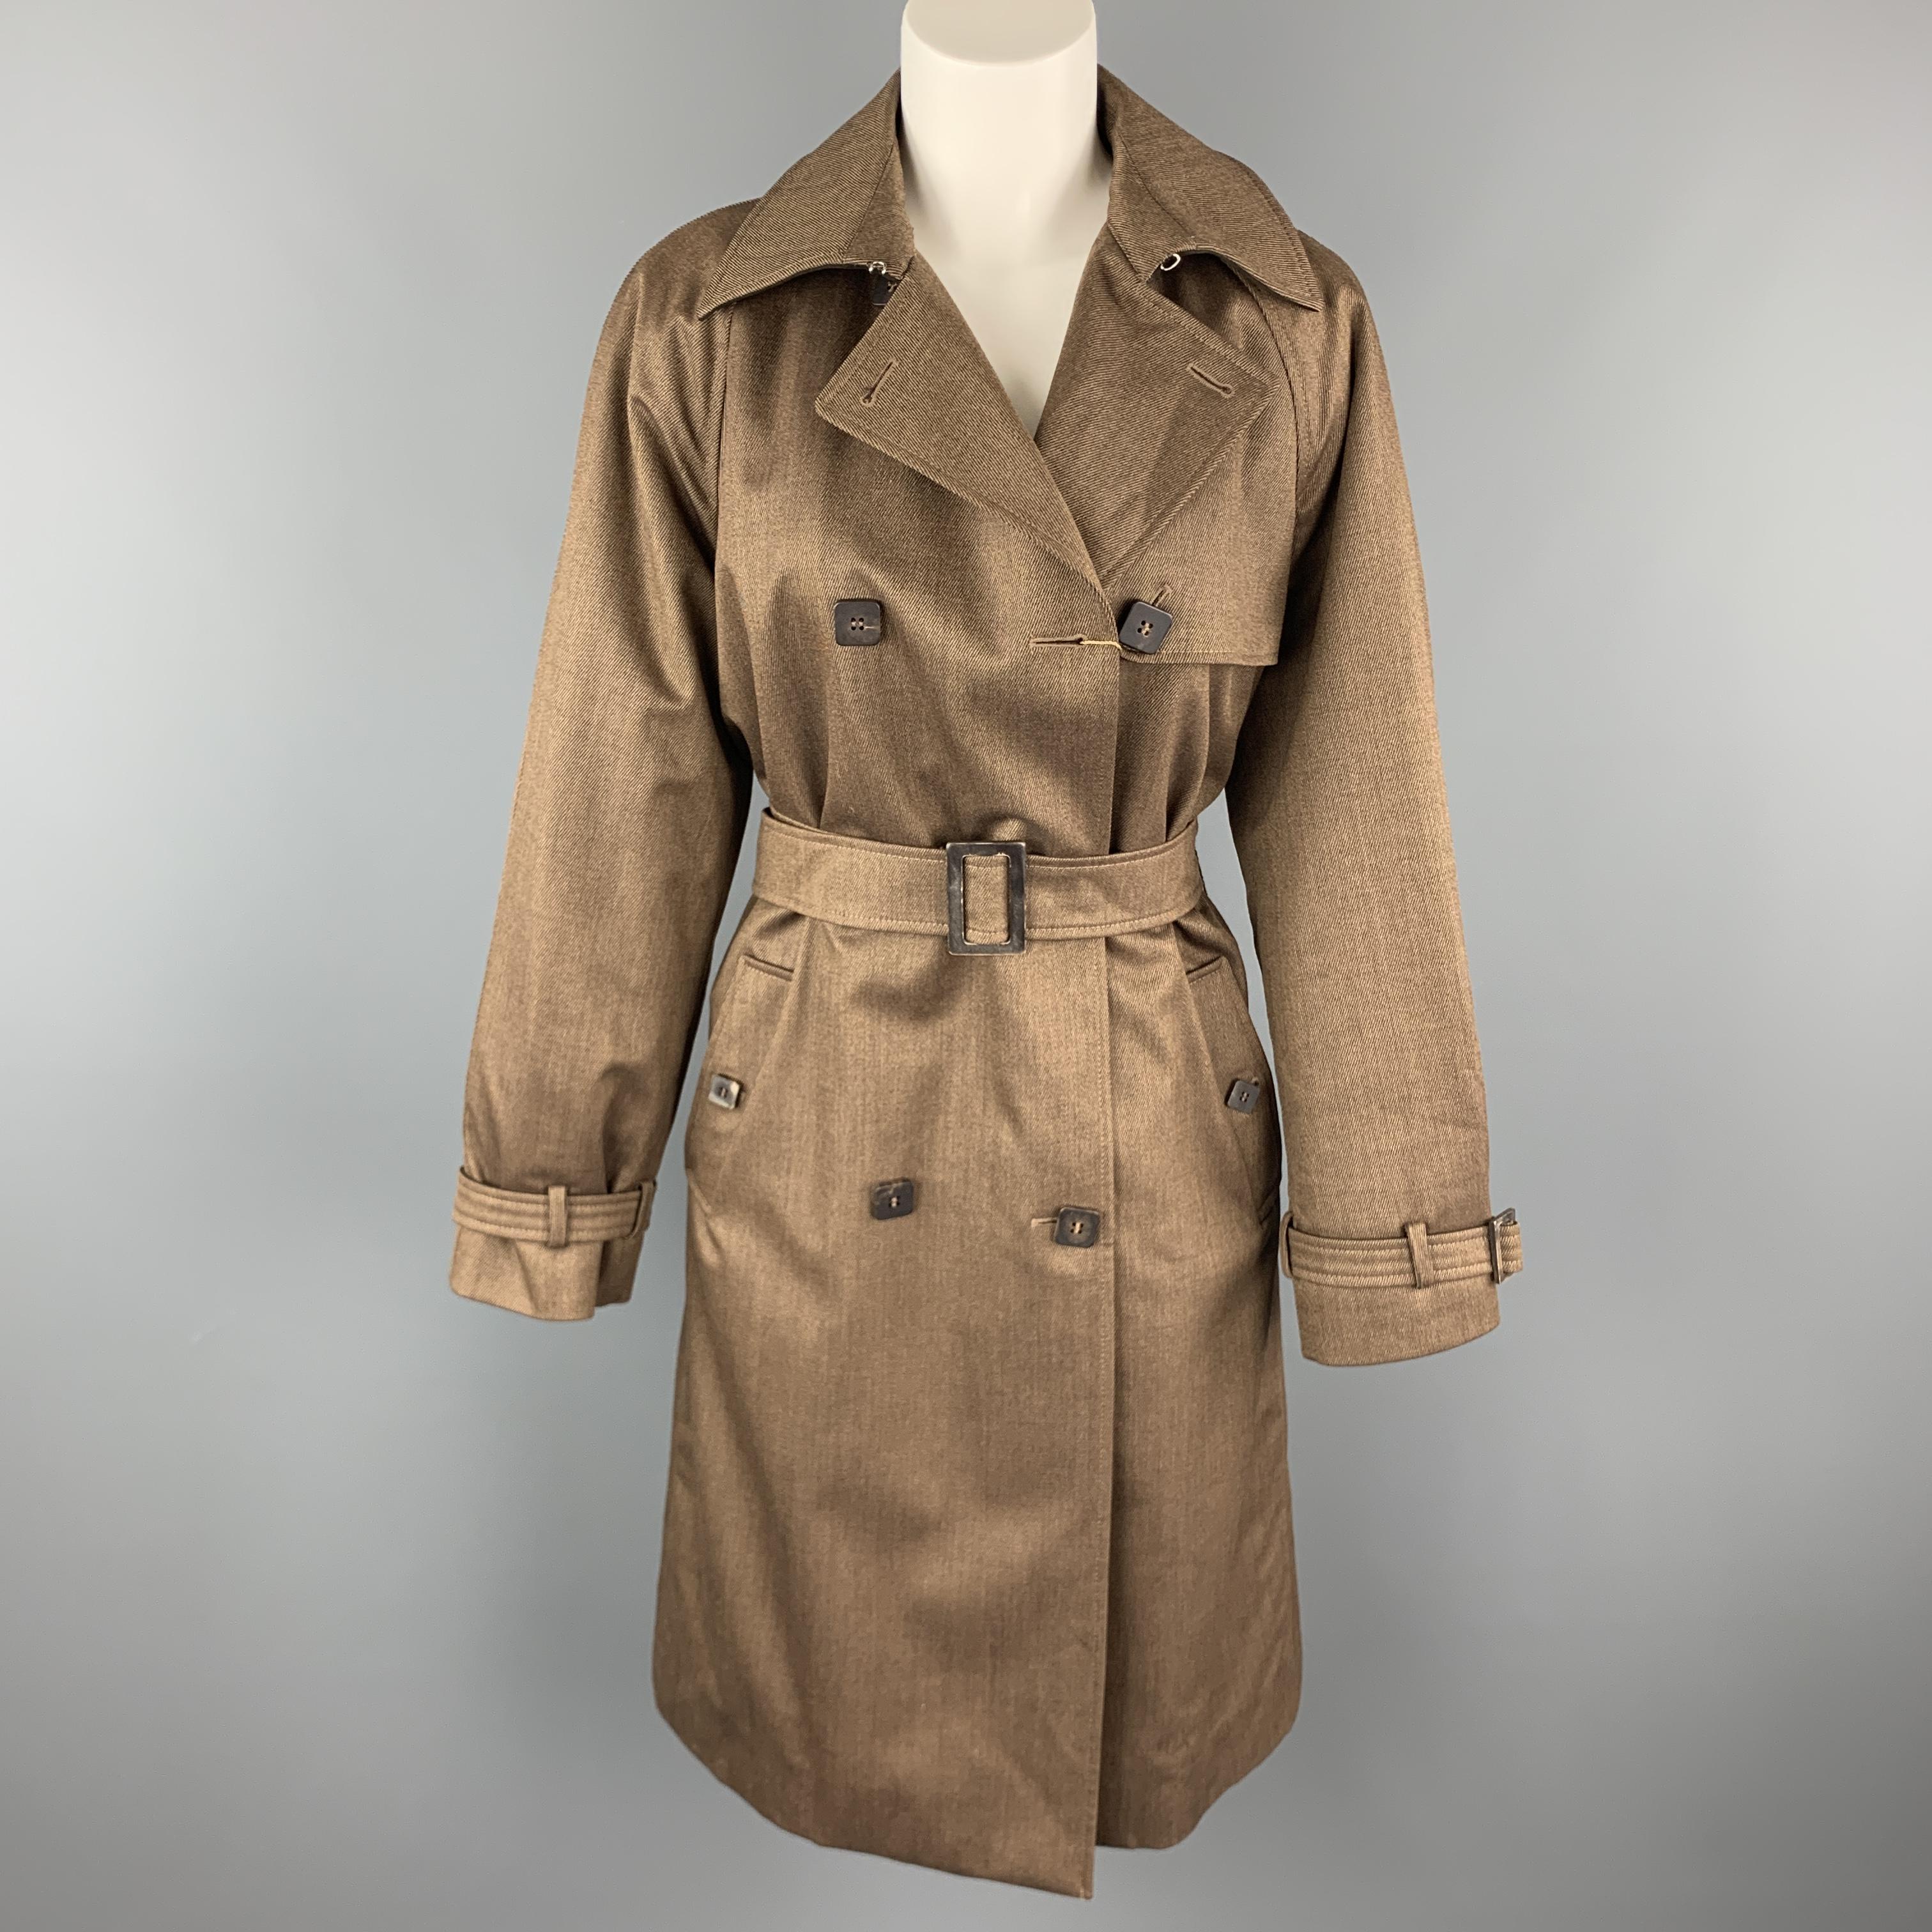 LORO PIANA trench coat comes in light brown wool blend twill with a suede lined pointed collar, double breasted front with square buttons, belted waist and cuffs, and detachable green satin liner. Made in Italy.

New with Tags.
Marked: IT